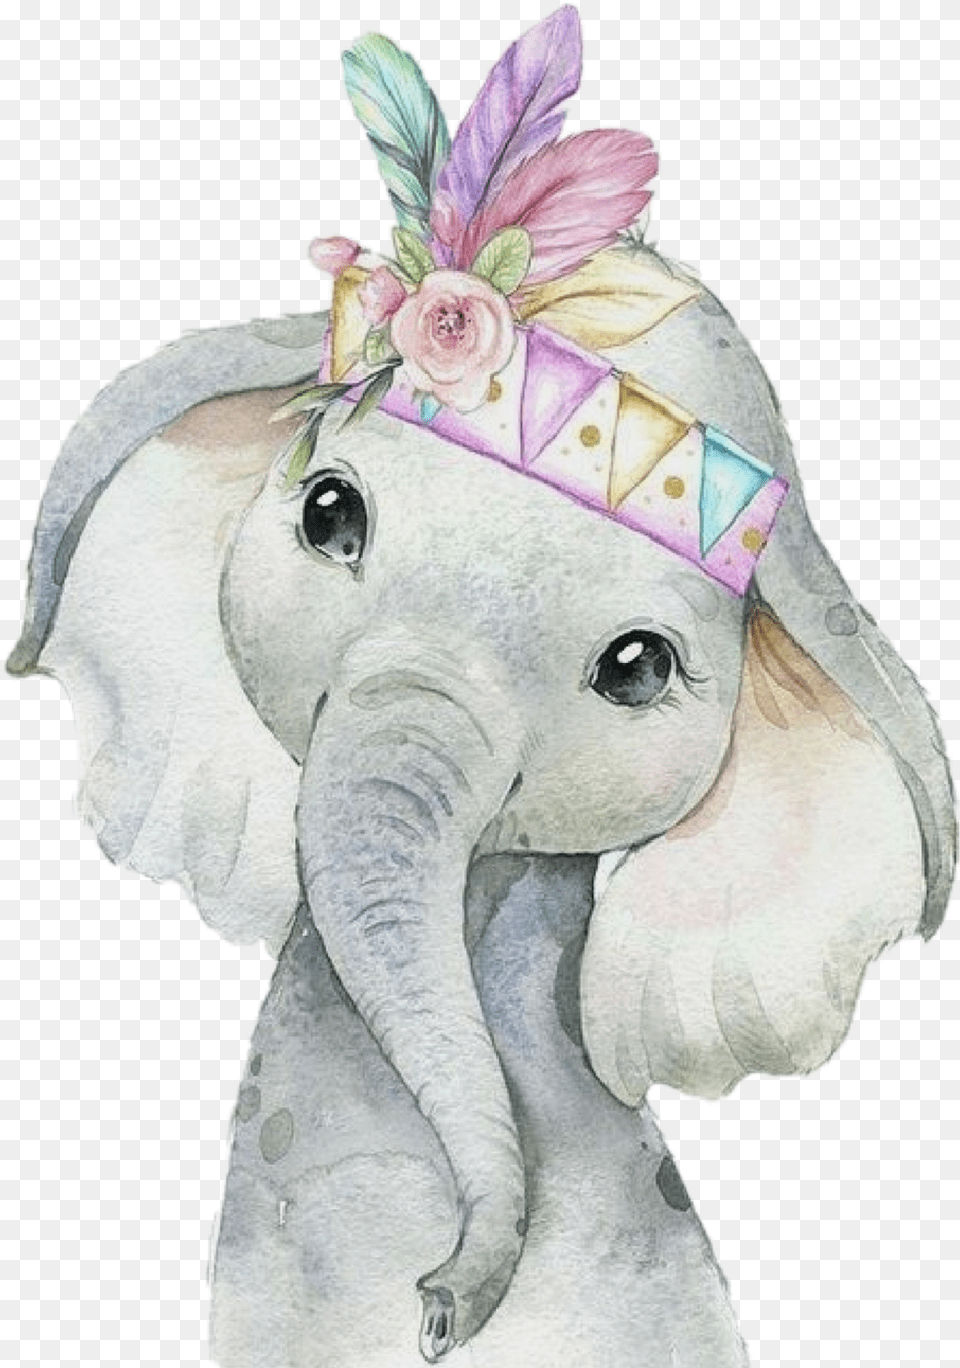 Elephant Colorful Cute Baby Animals Watercolor Elephant, Person, Clothing, Hat, Accessories Png